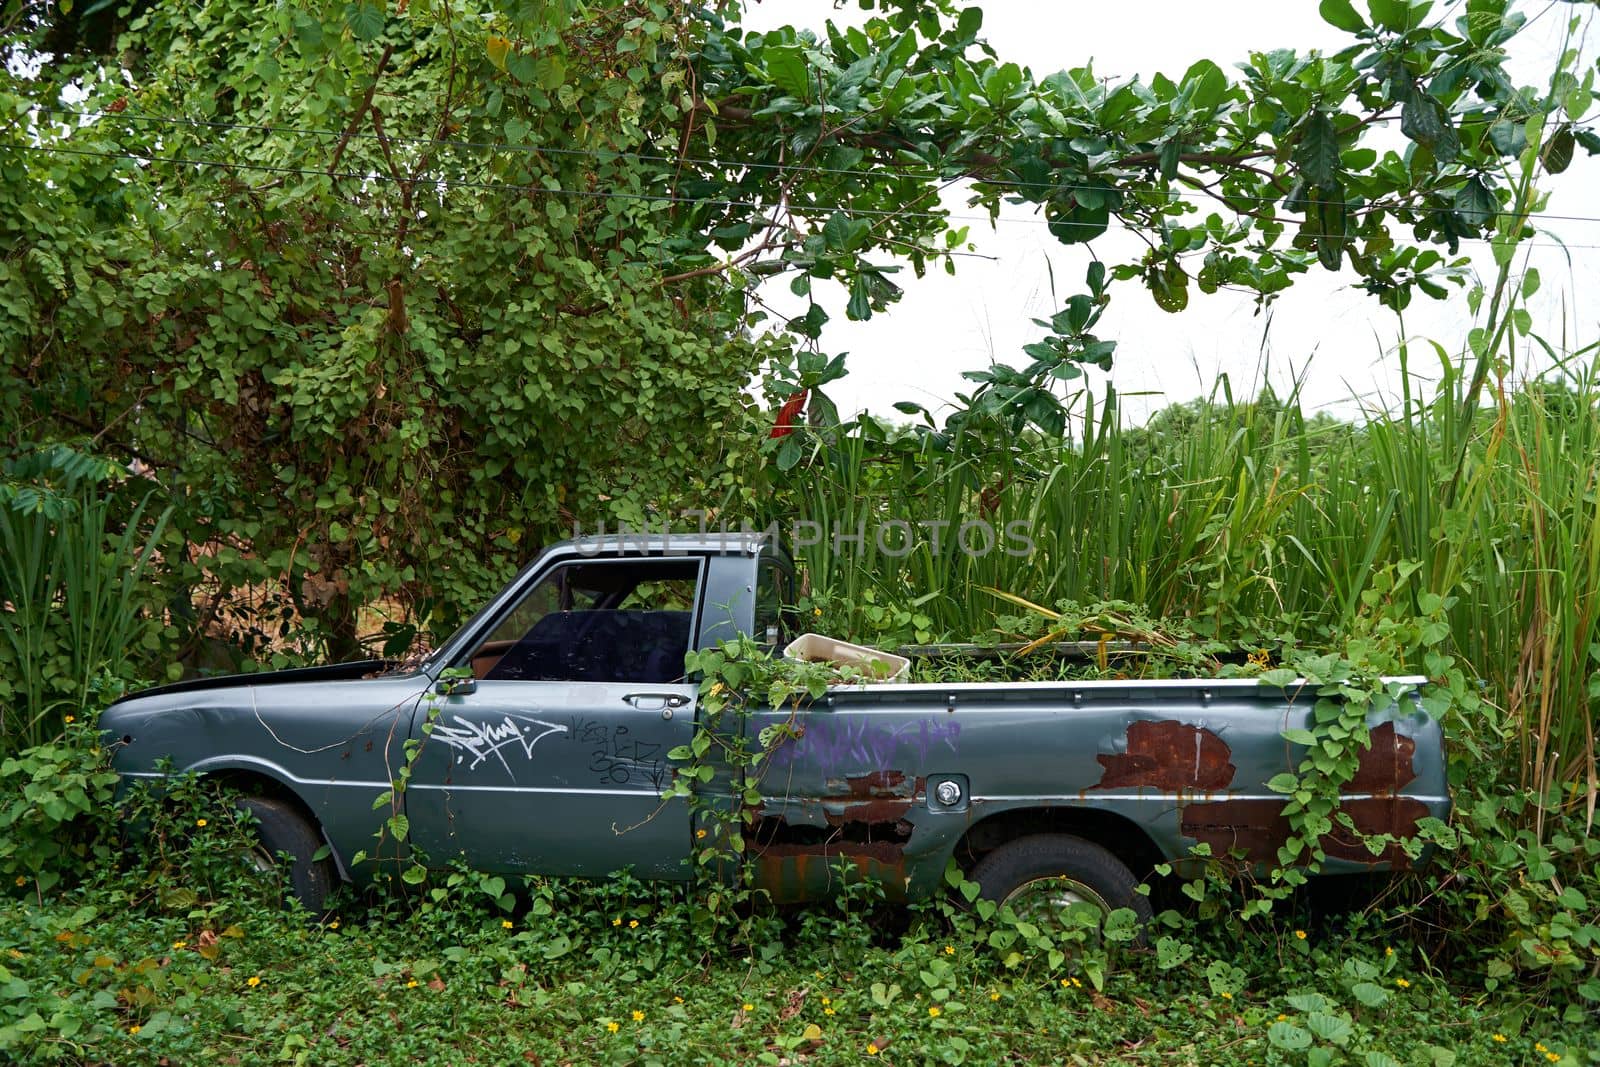 A long abandoned pickup truck in the woods has become overgrown with bushes.